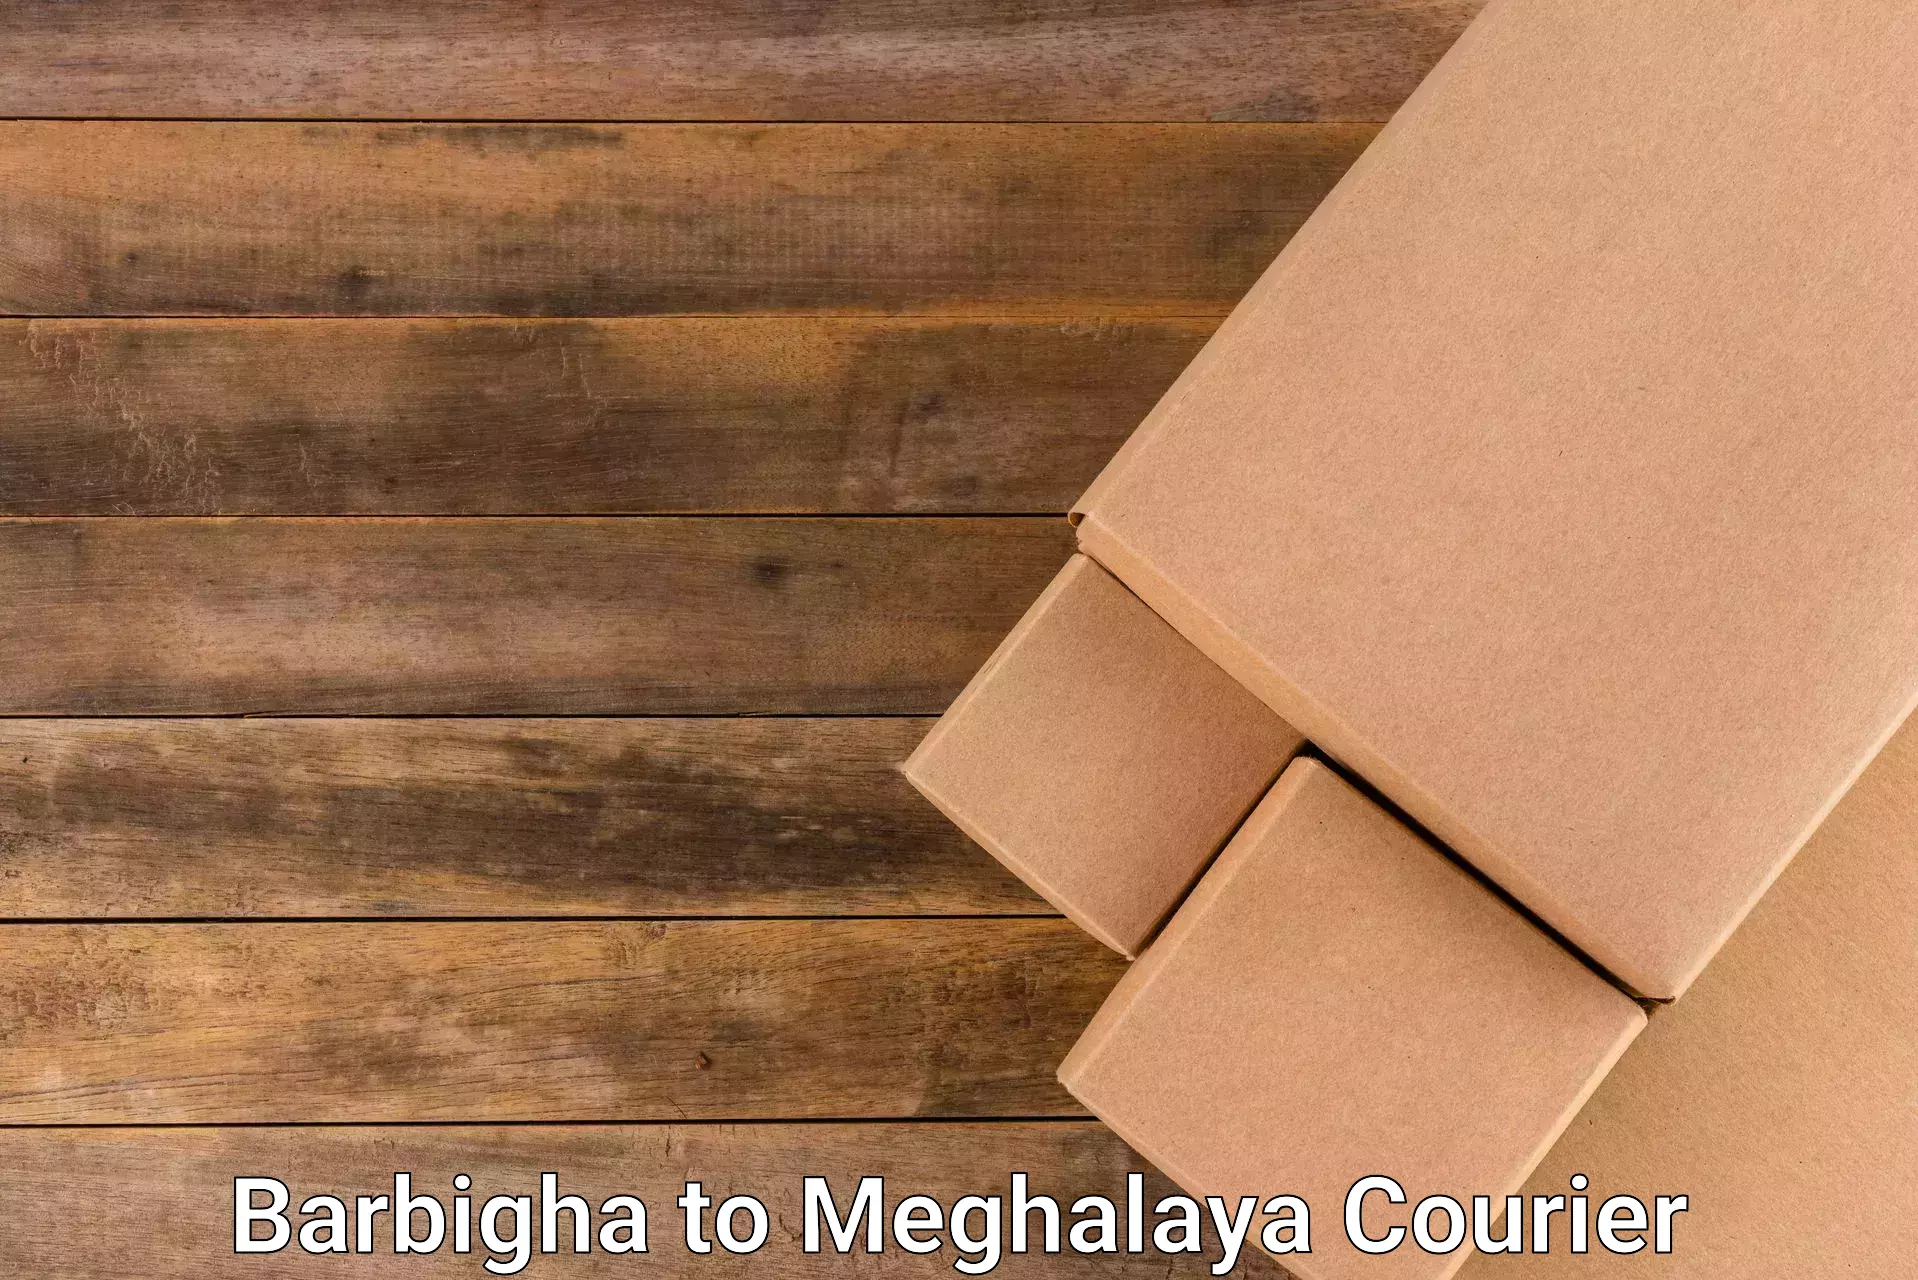 Residential courier service in Barbigha to Tura